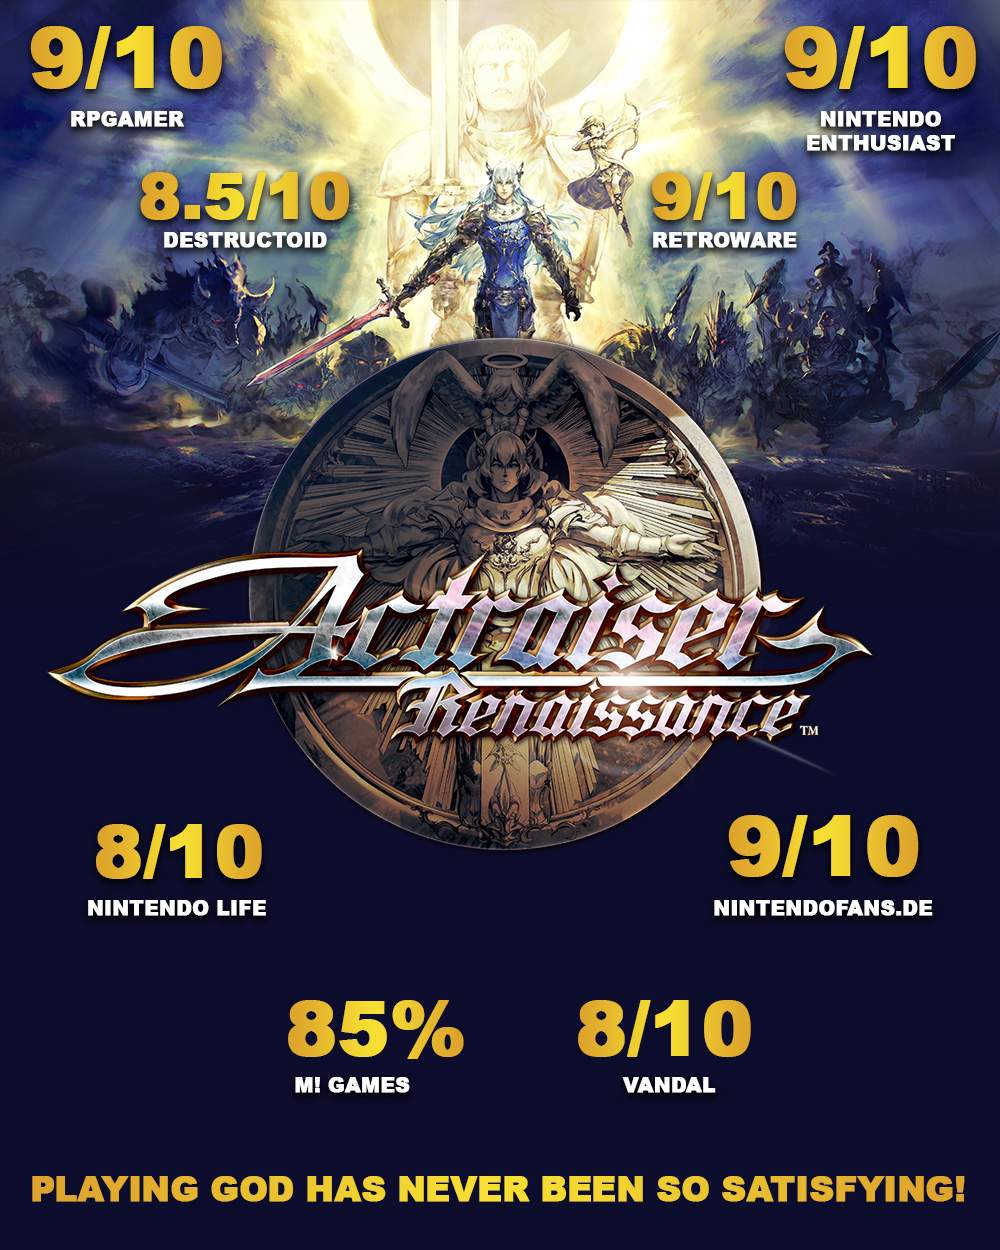 Actraiser Renaissance key art with a range of review scores and quotes.